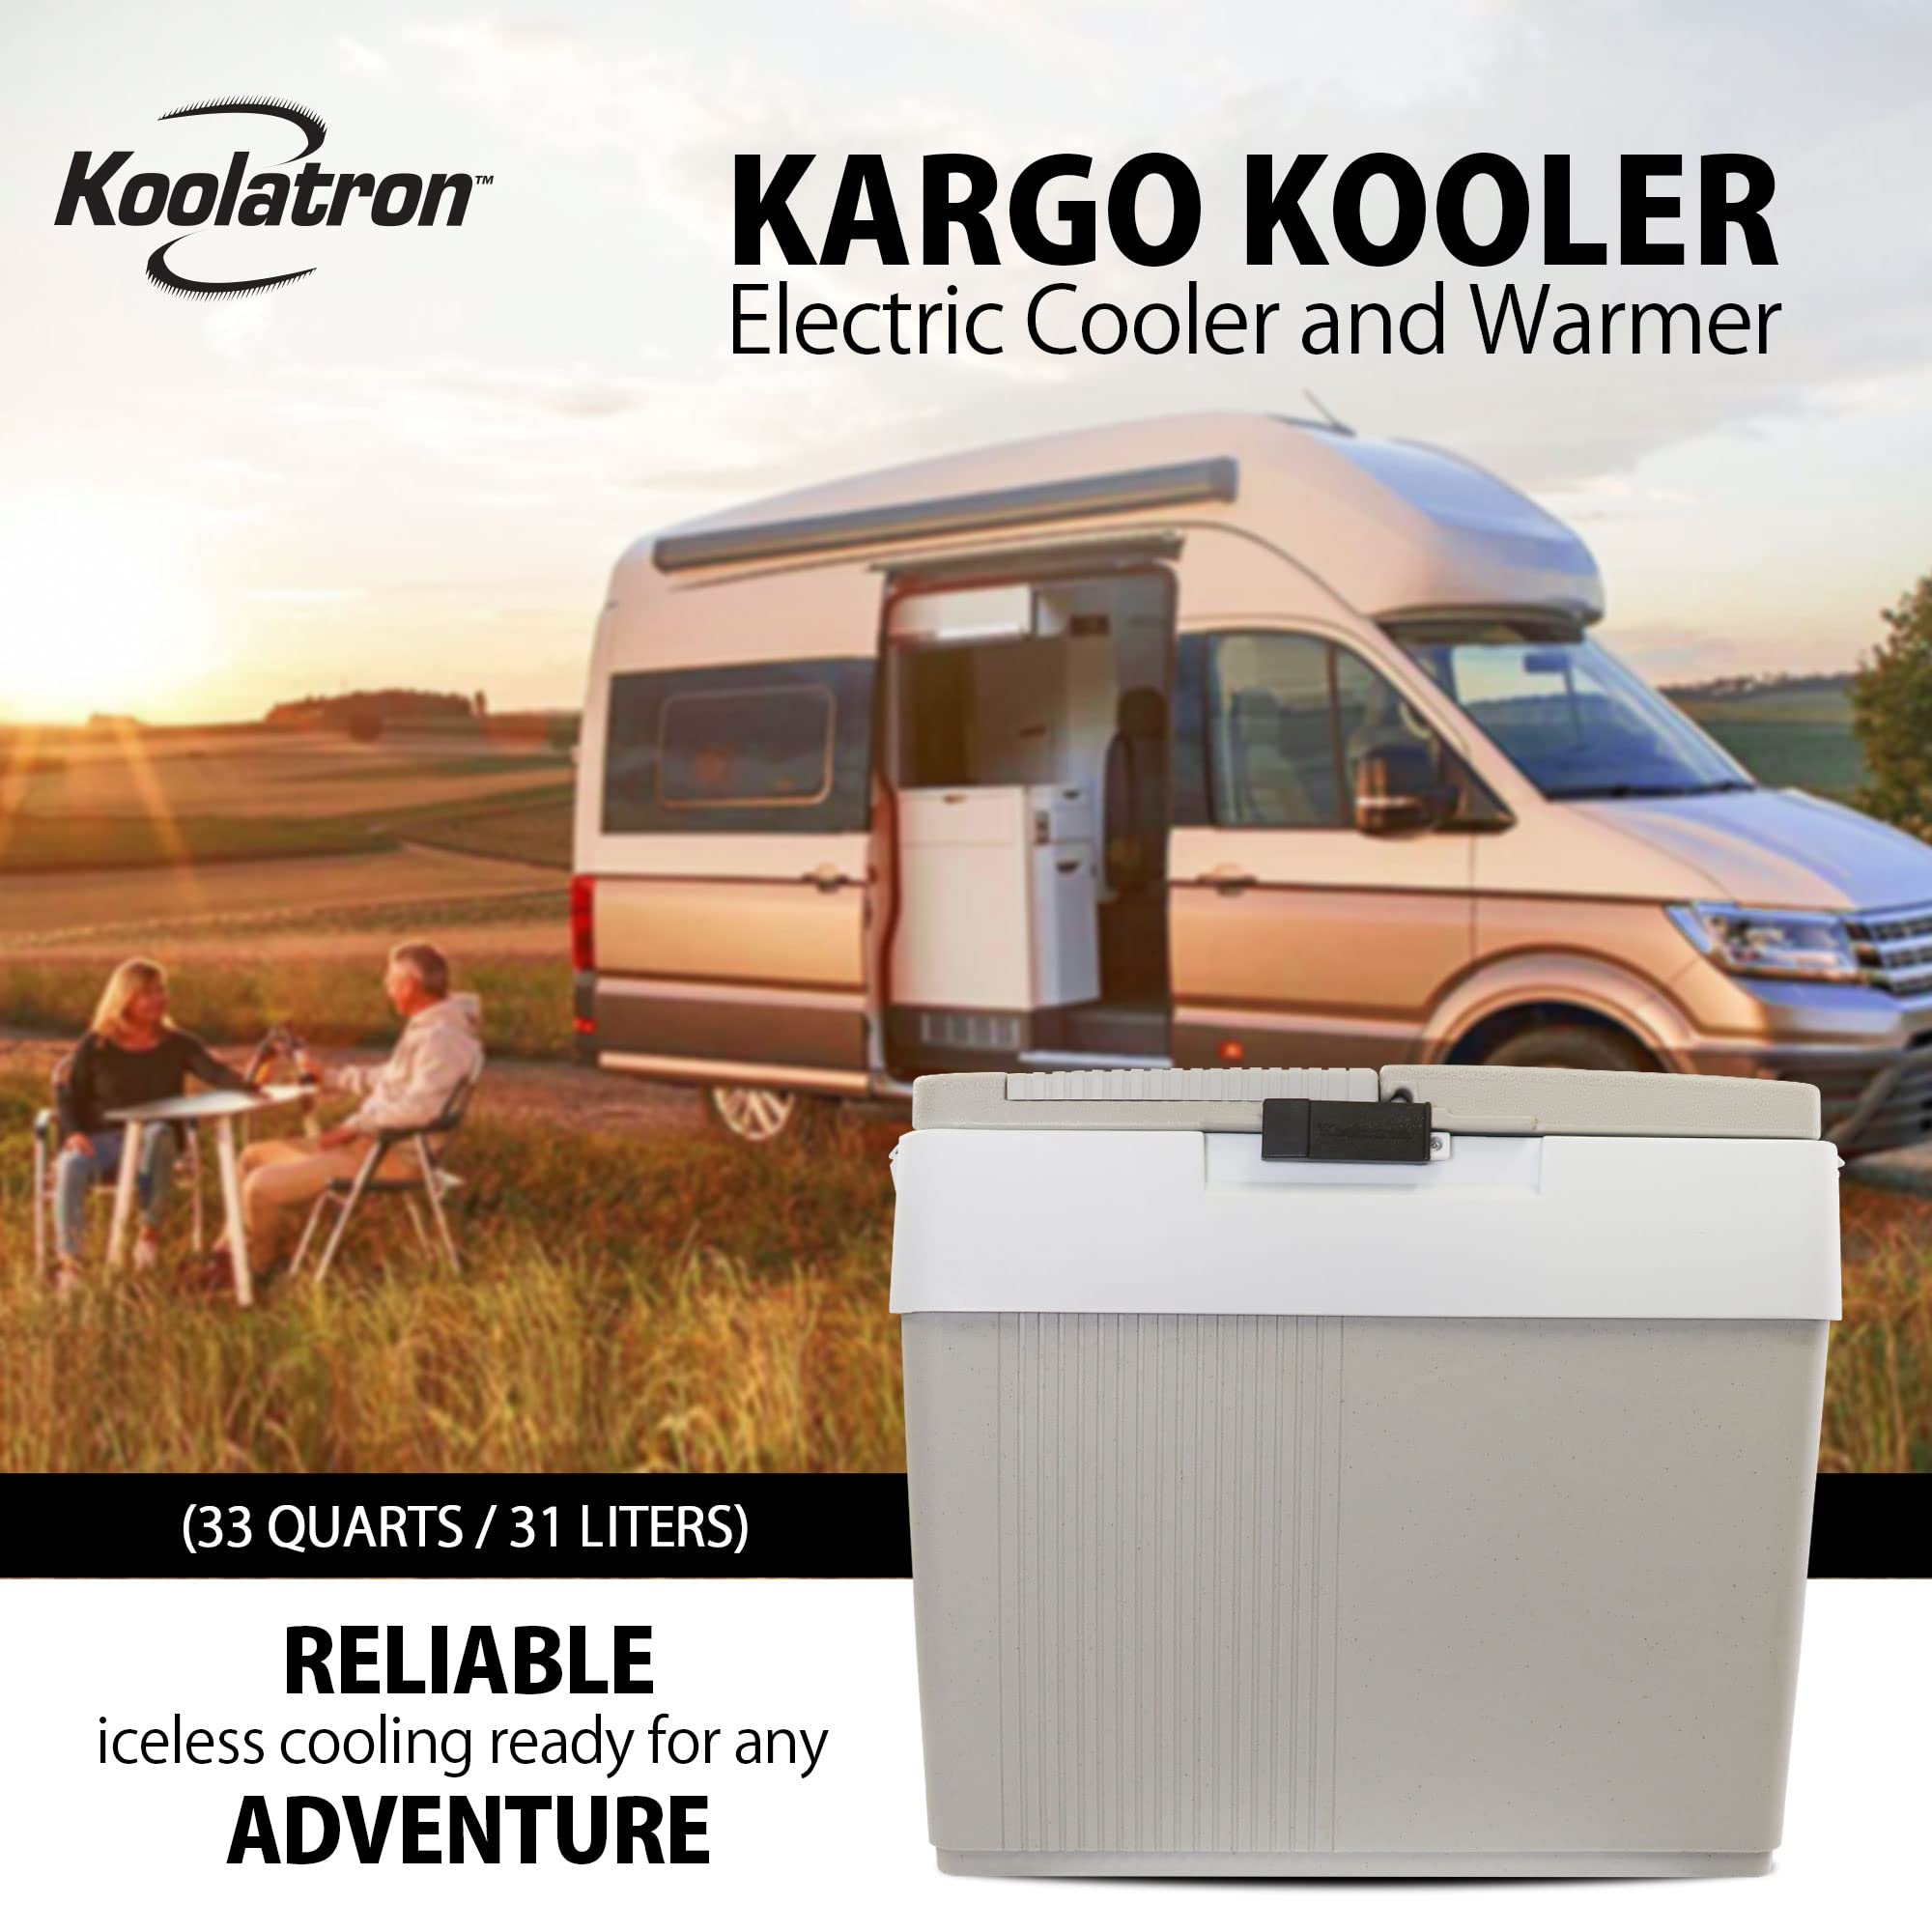 Koolatron Electric Portable Cooler Plug in 12V Car Cooler/Warmer, 33 qt (31 L),No Ice Thermo Electric Portable Fridge for Camping, Travel Road Trips Trucking with 12 Volt DC Power Cord, Gray/White.